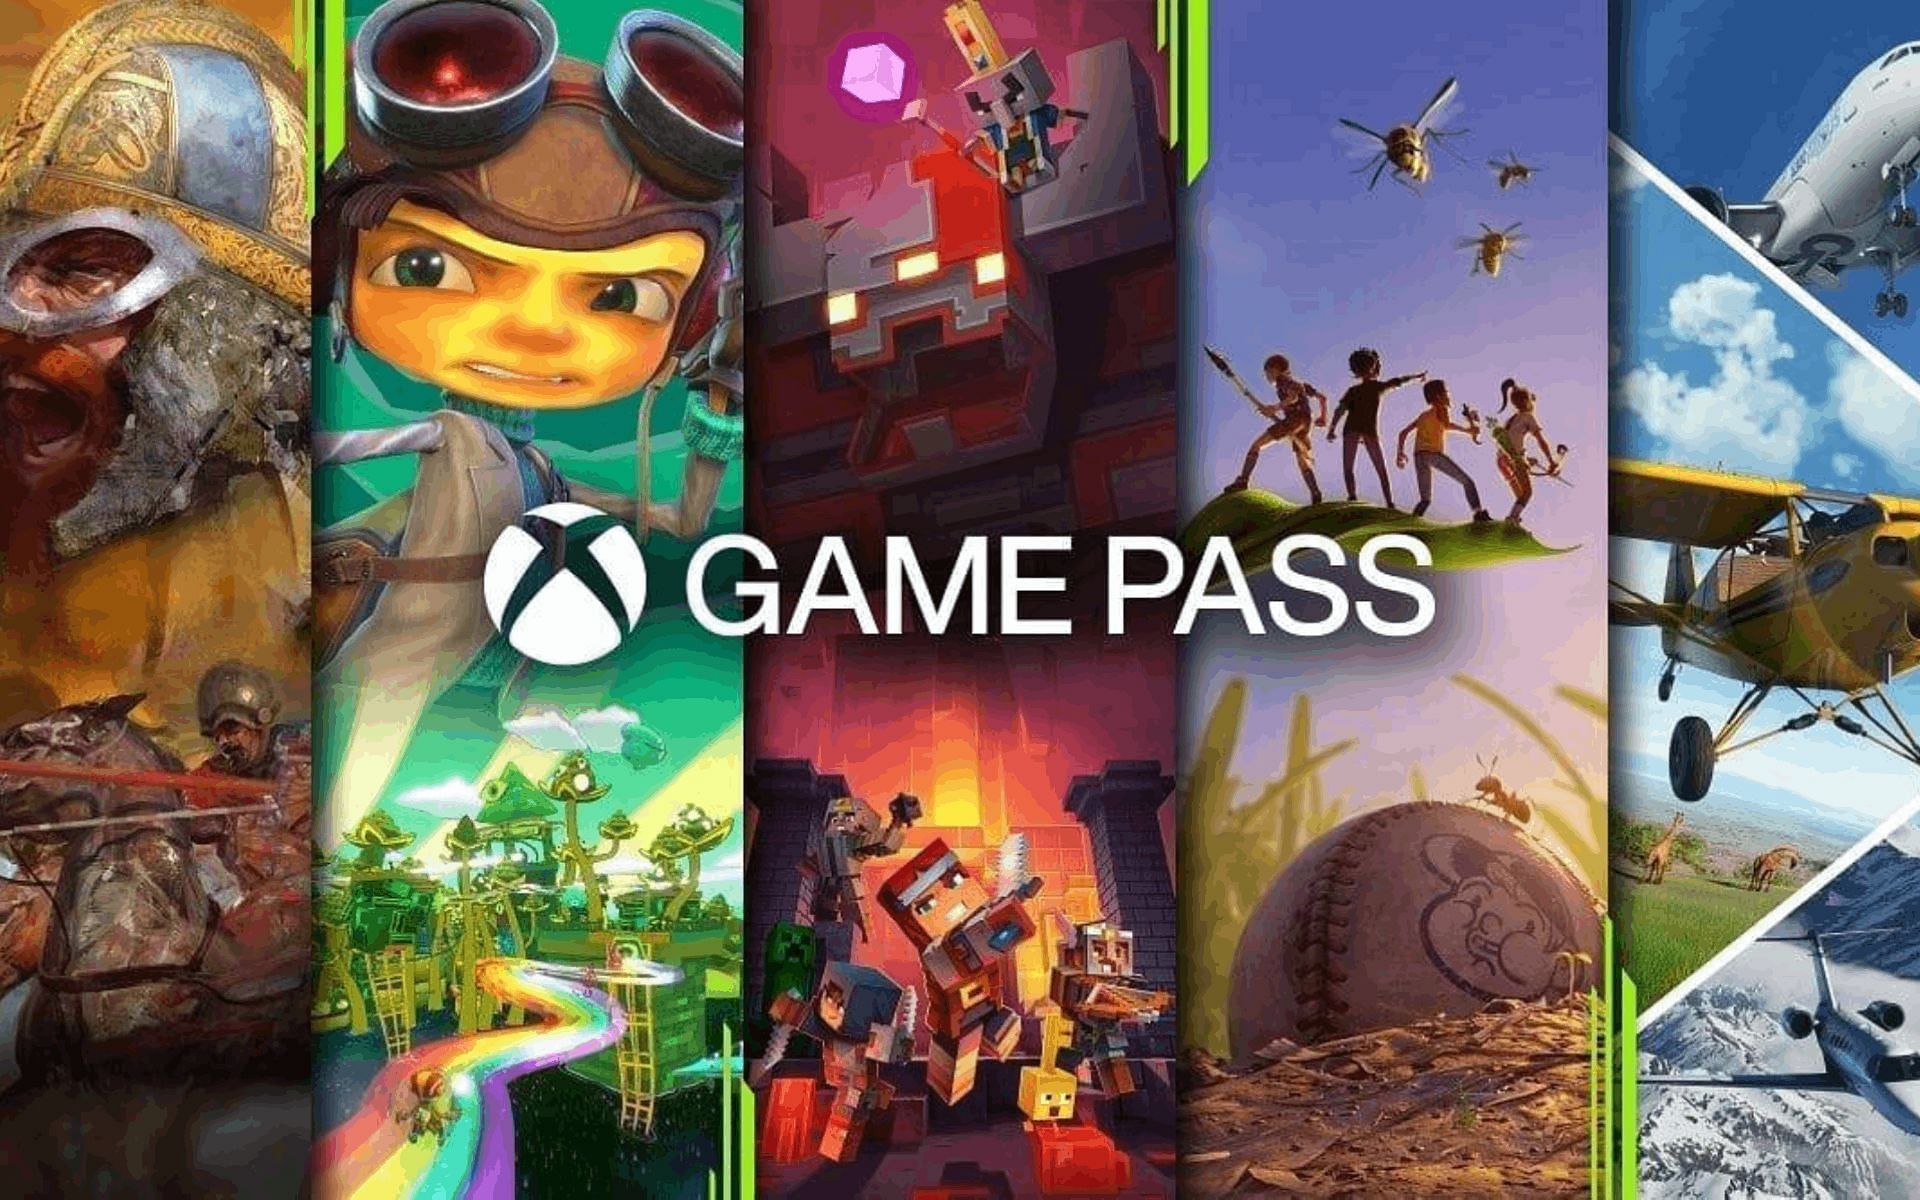 Xbox is reducing Game Pass price in India (Image by Xbox)